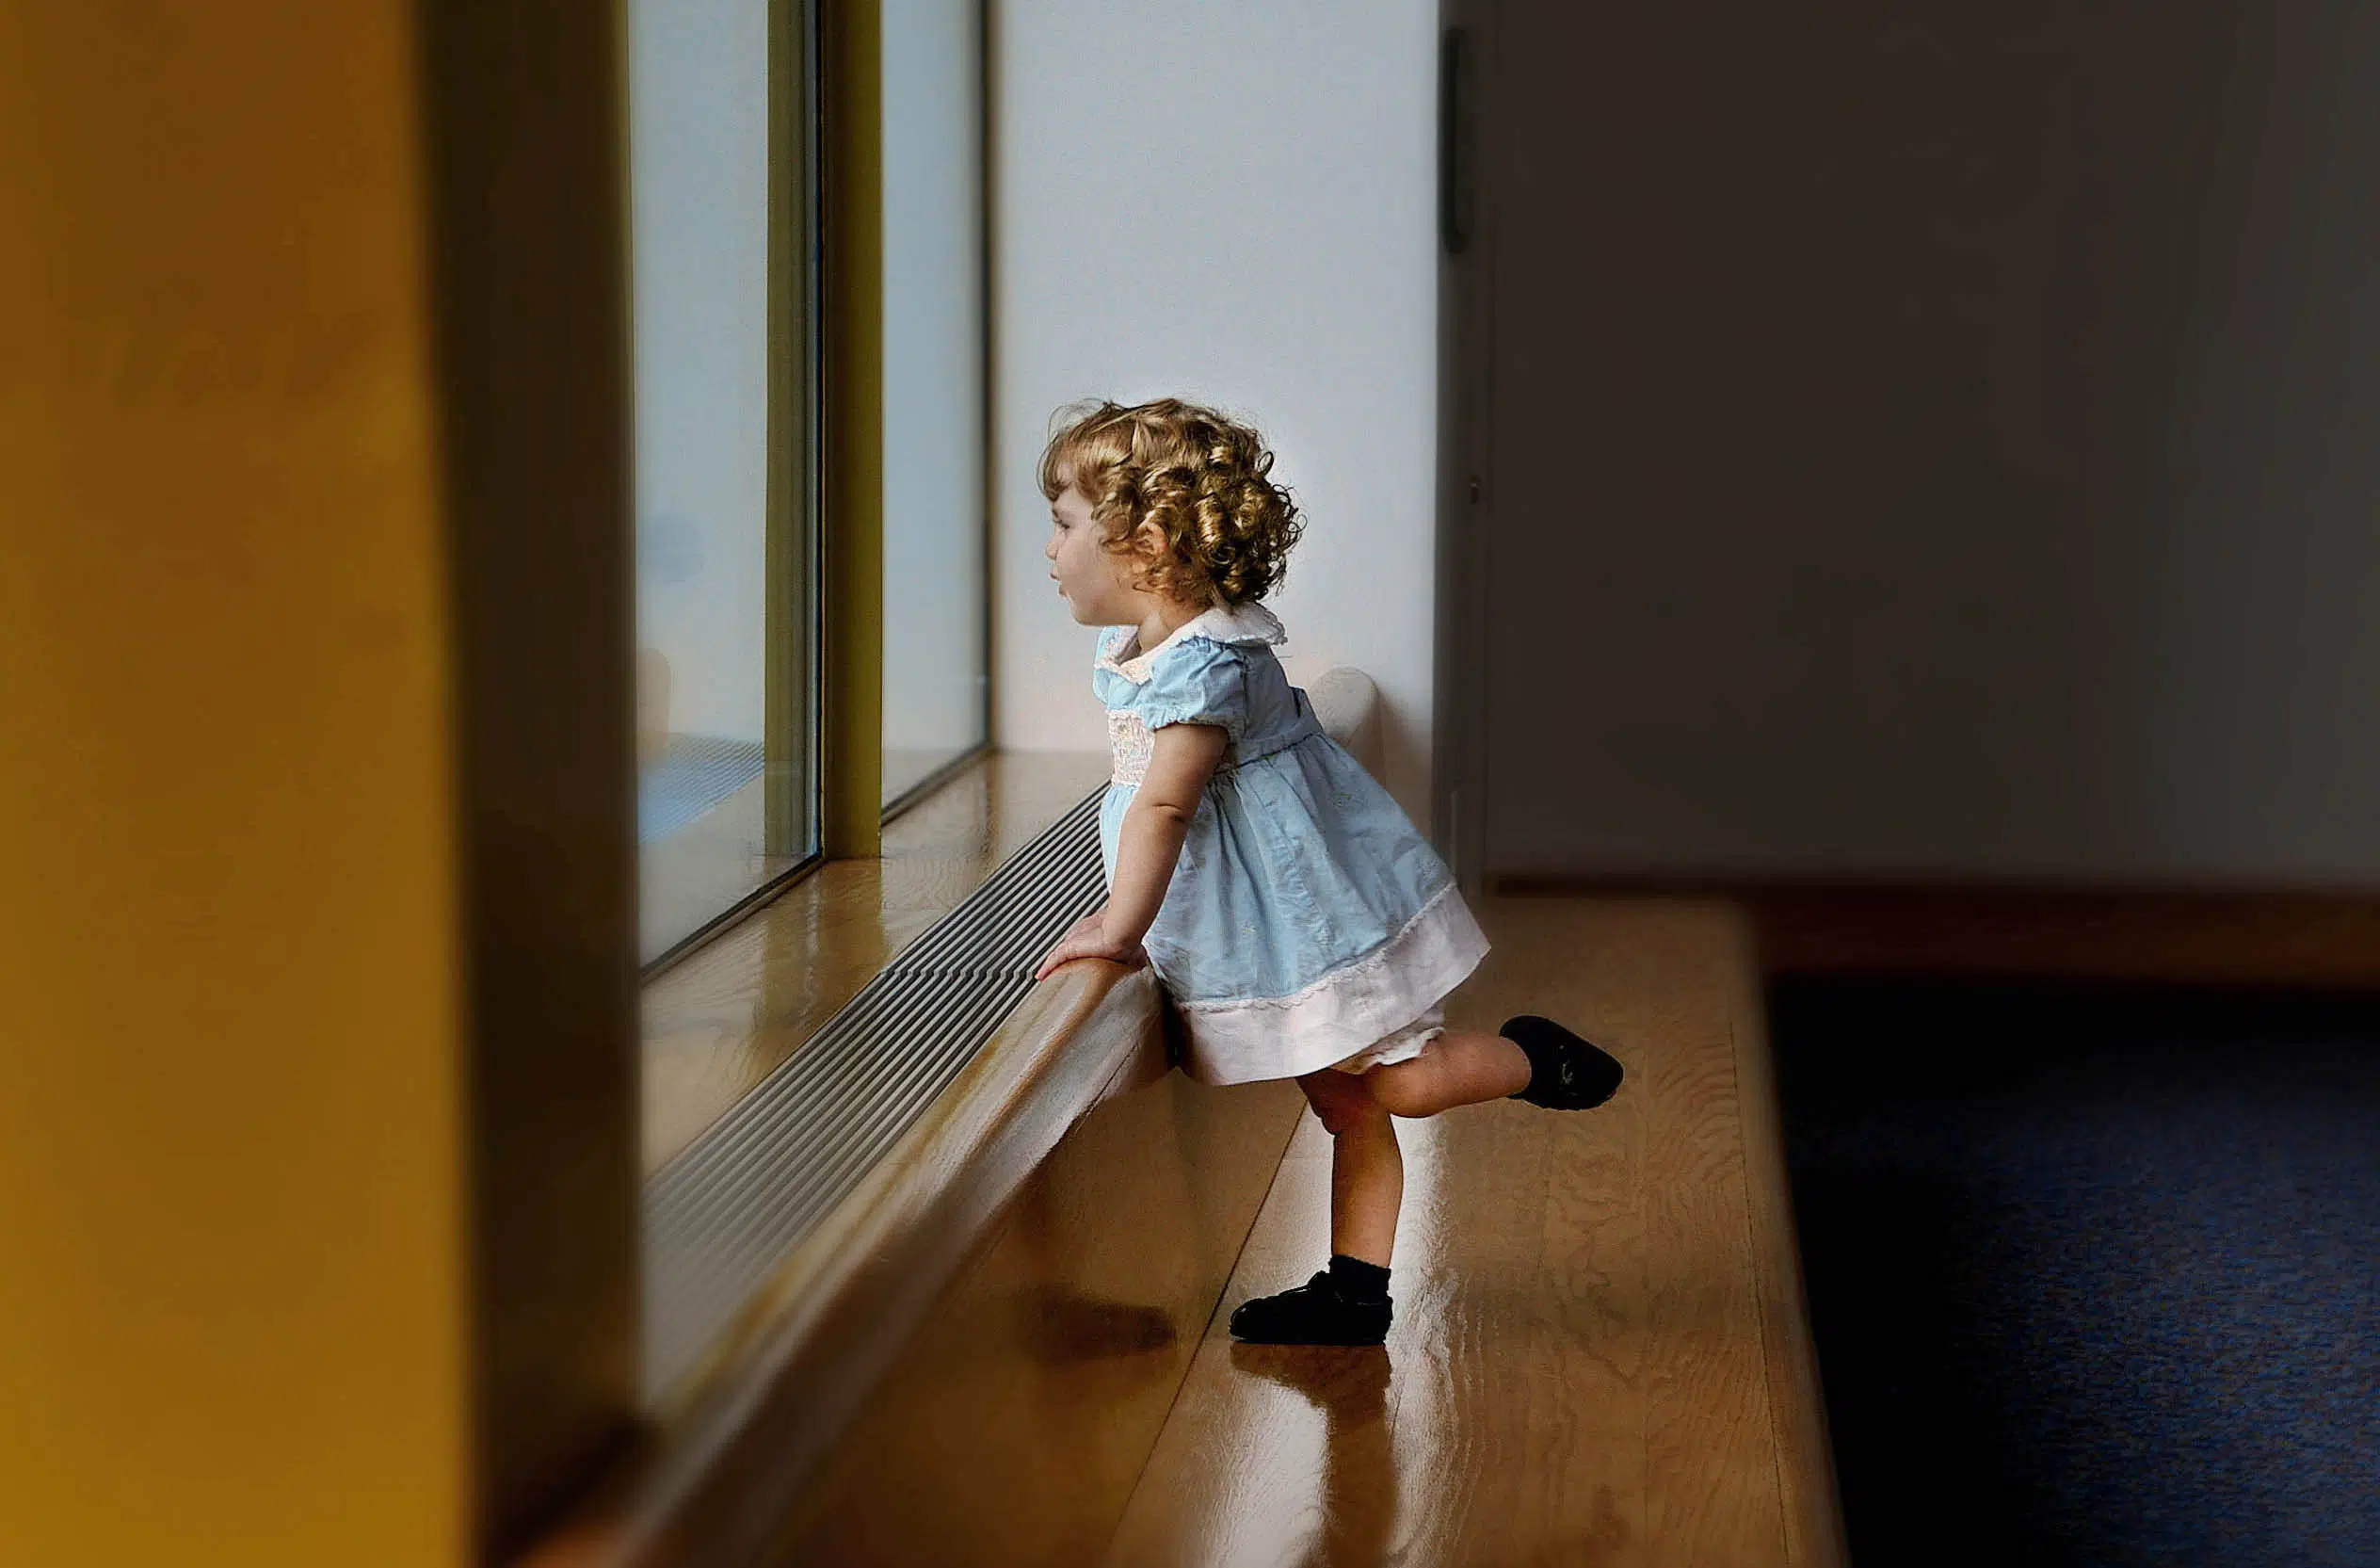 A young child in a dress looking out the window